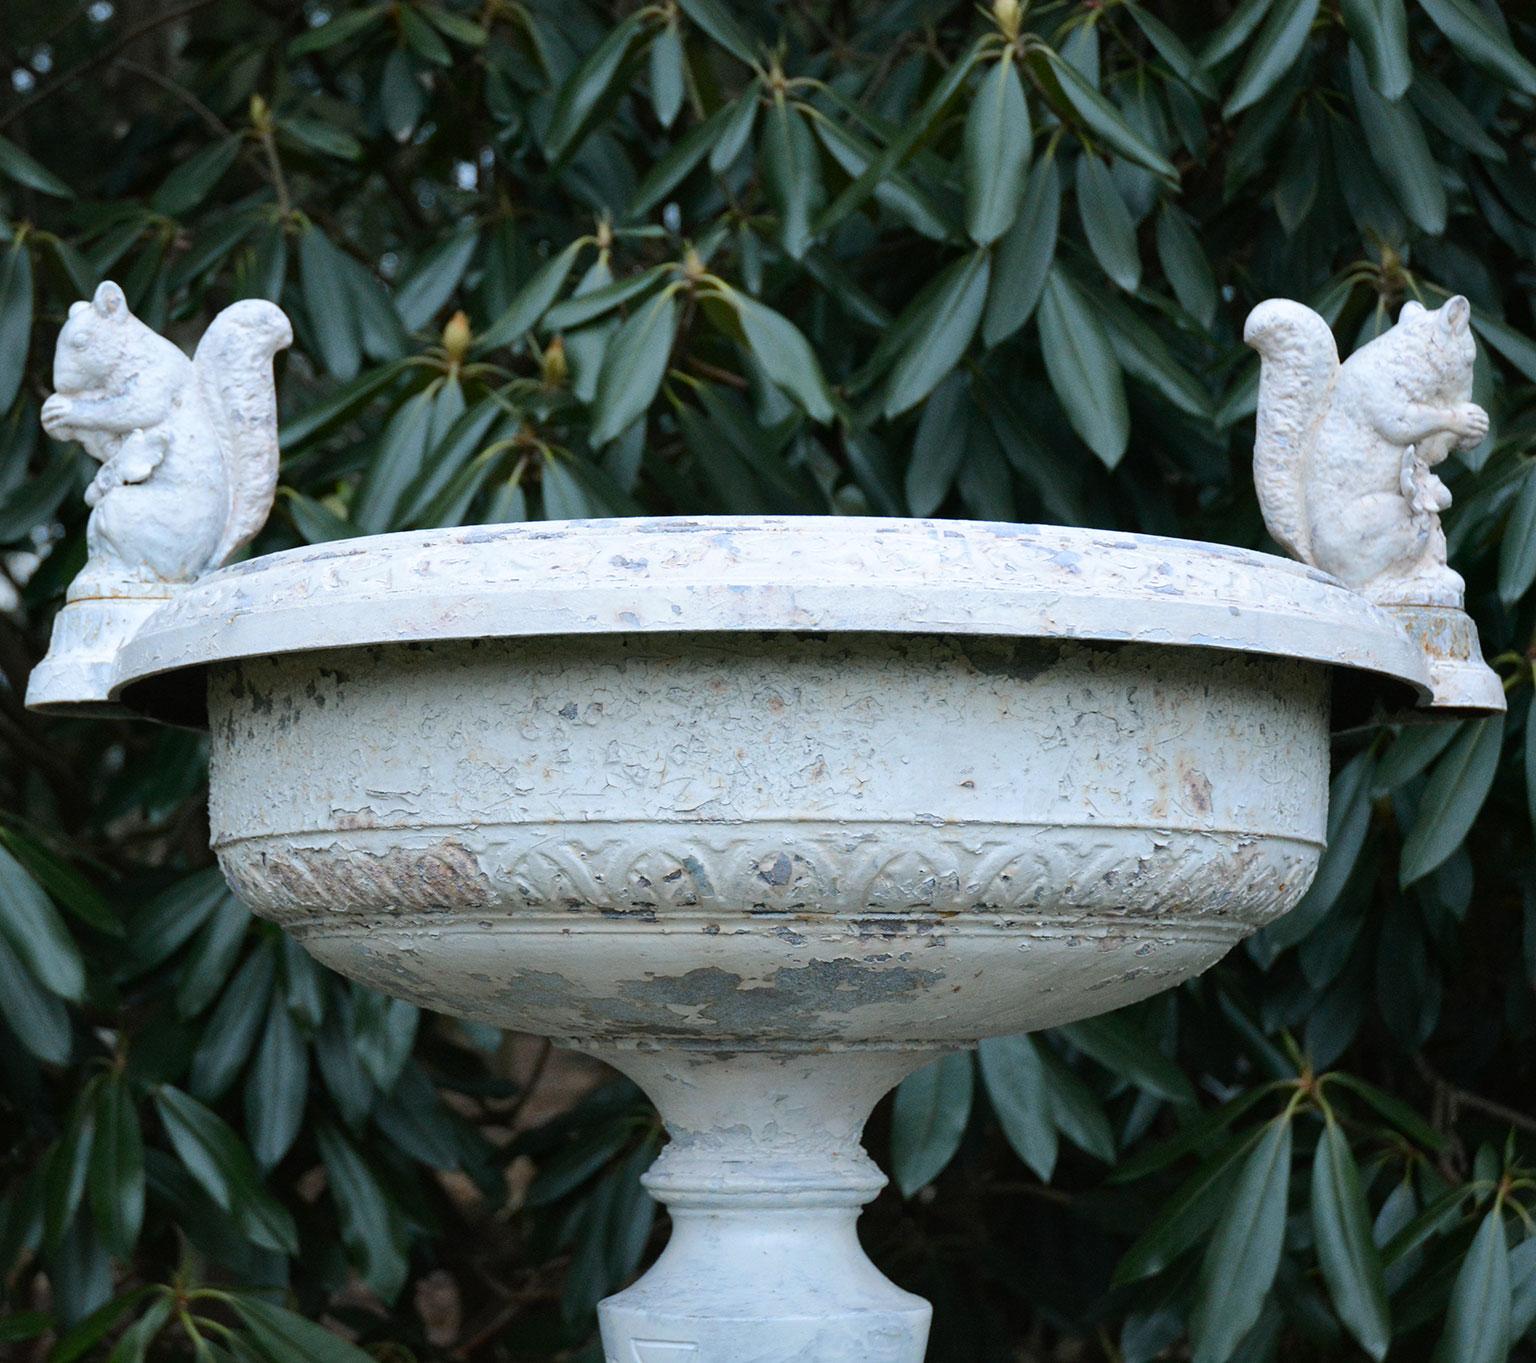 A cast-iron tazza-form urn with squirrel handles, marked “Abendroth NY”.

William, Augustus, and John Abendroth were German immigrants who owned the eponymous firm. Beginning in 1841, the brothers ran a well-managed factory producing stoves and